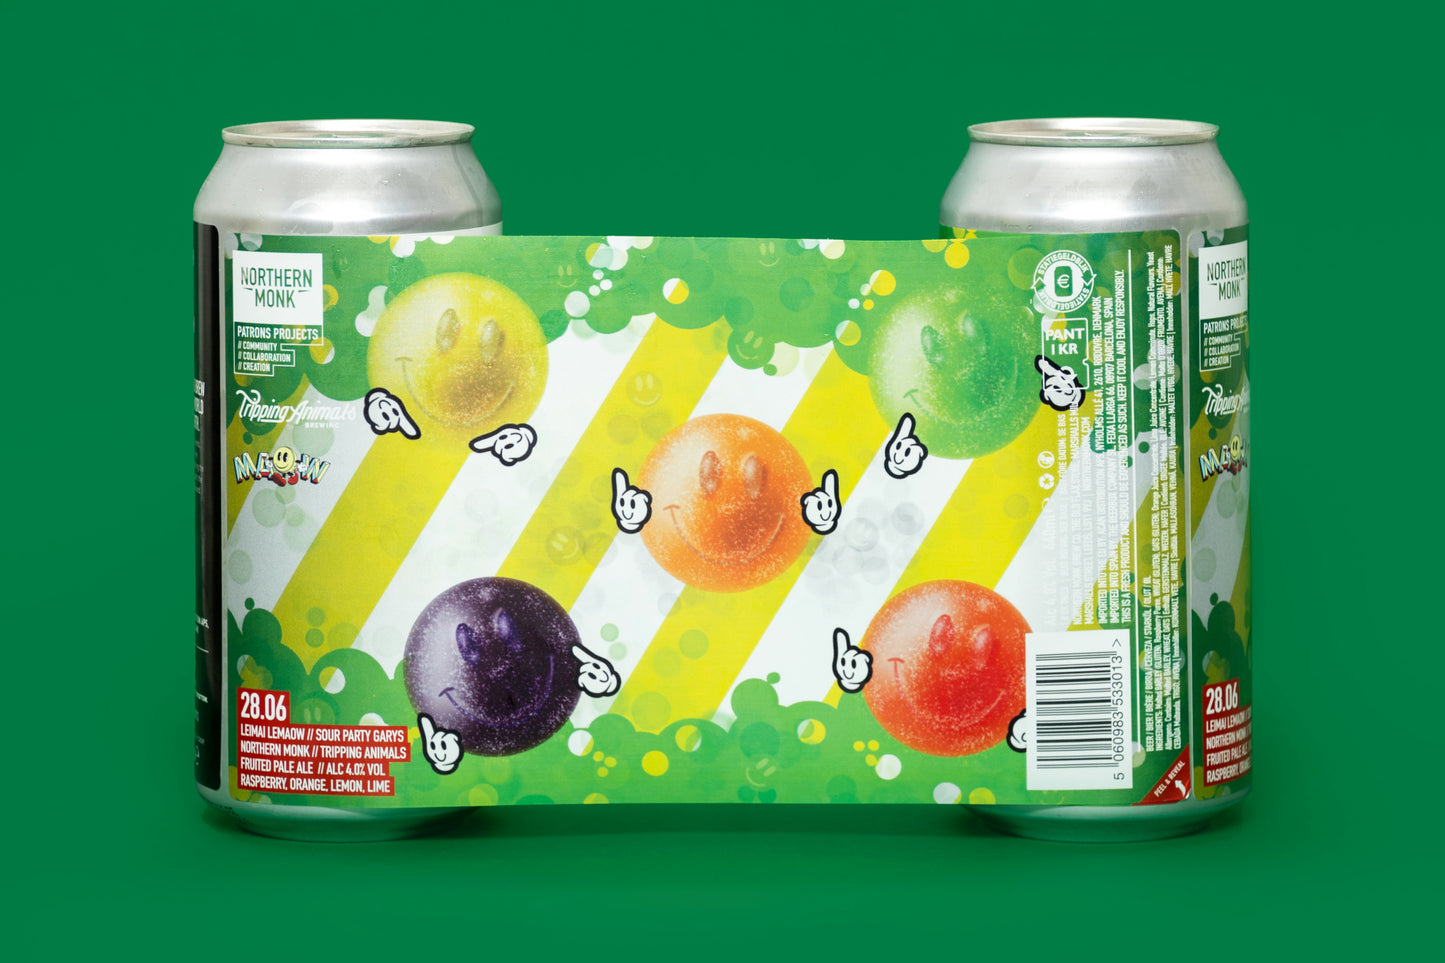 4 PACK // 28.06 // LEIMAI LEMAOW  // TRIPPING ANIMALS // SOUR PARTY GARYS // FRUITED PALE ALE